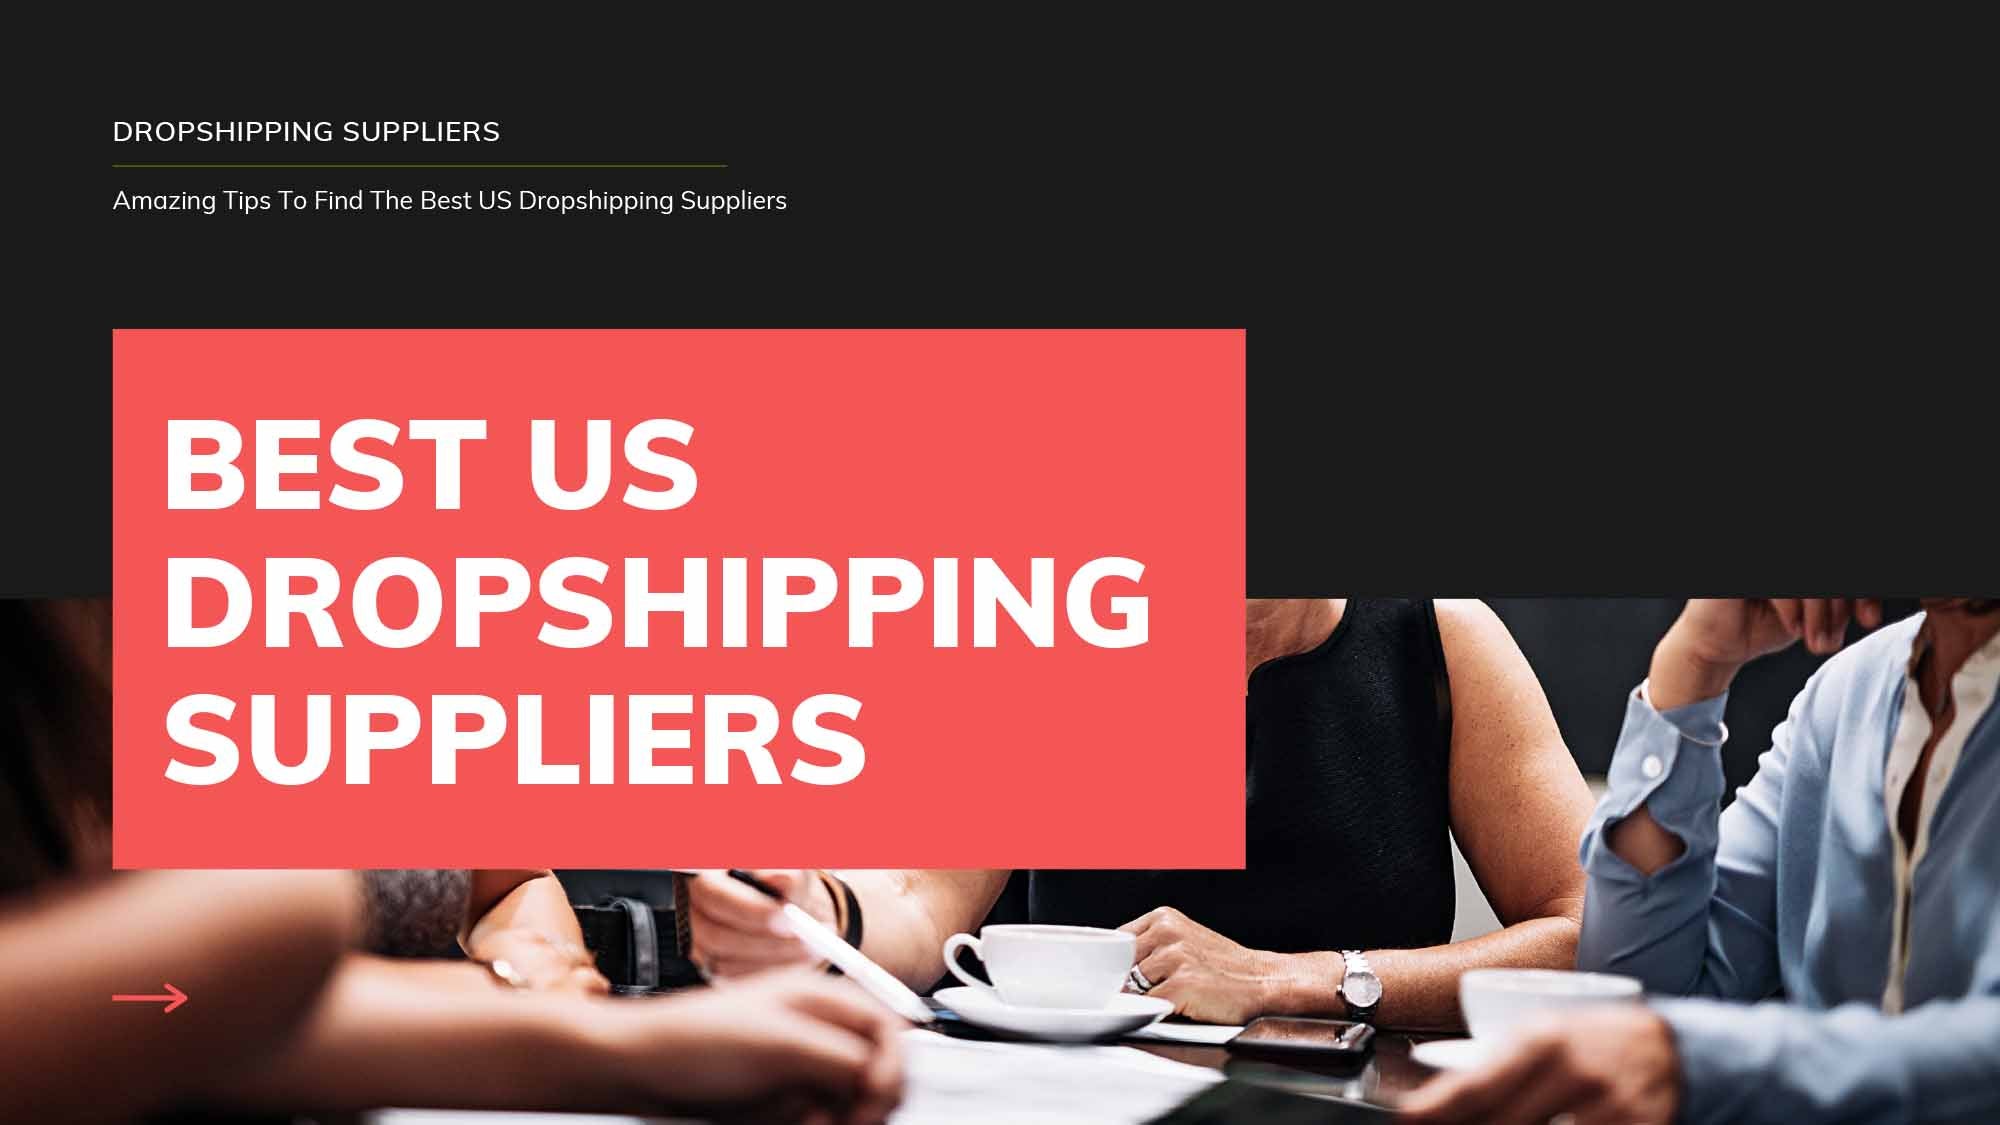 Amazing Tips To Find The Best US Dropshipping Suppliers!